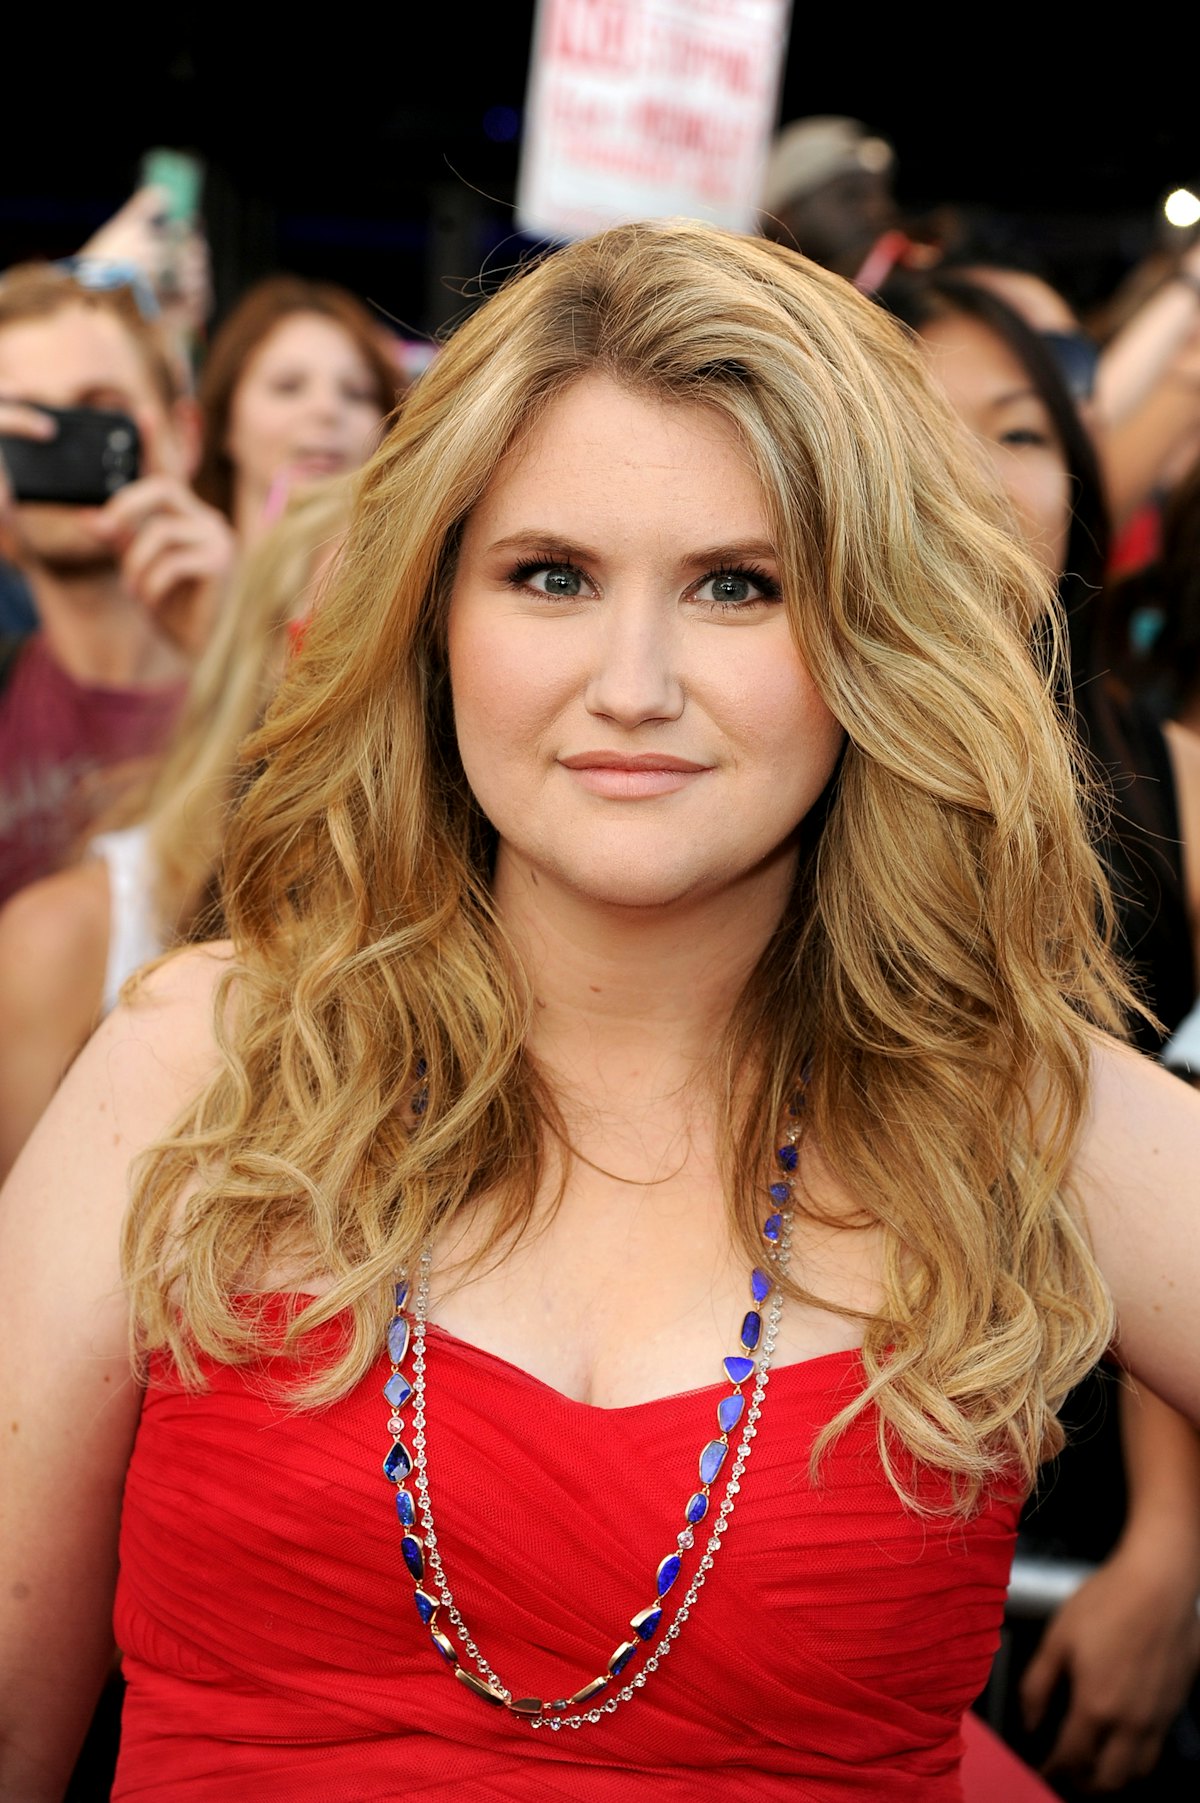 christopher hall recommends jillian bell husband pic